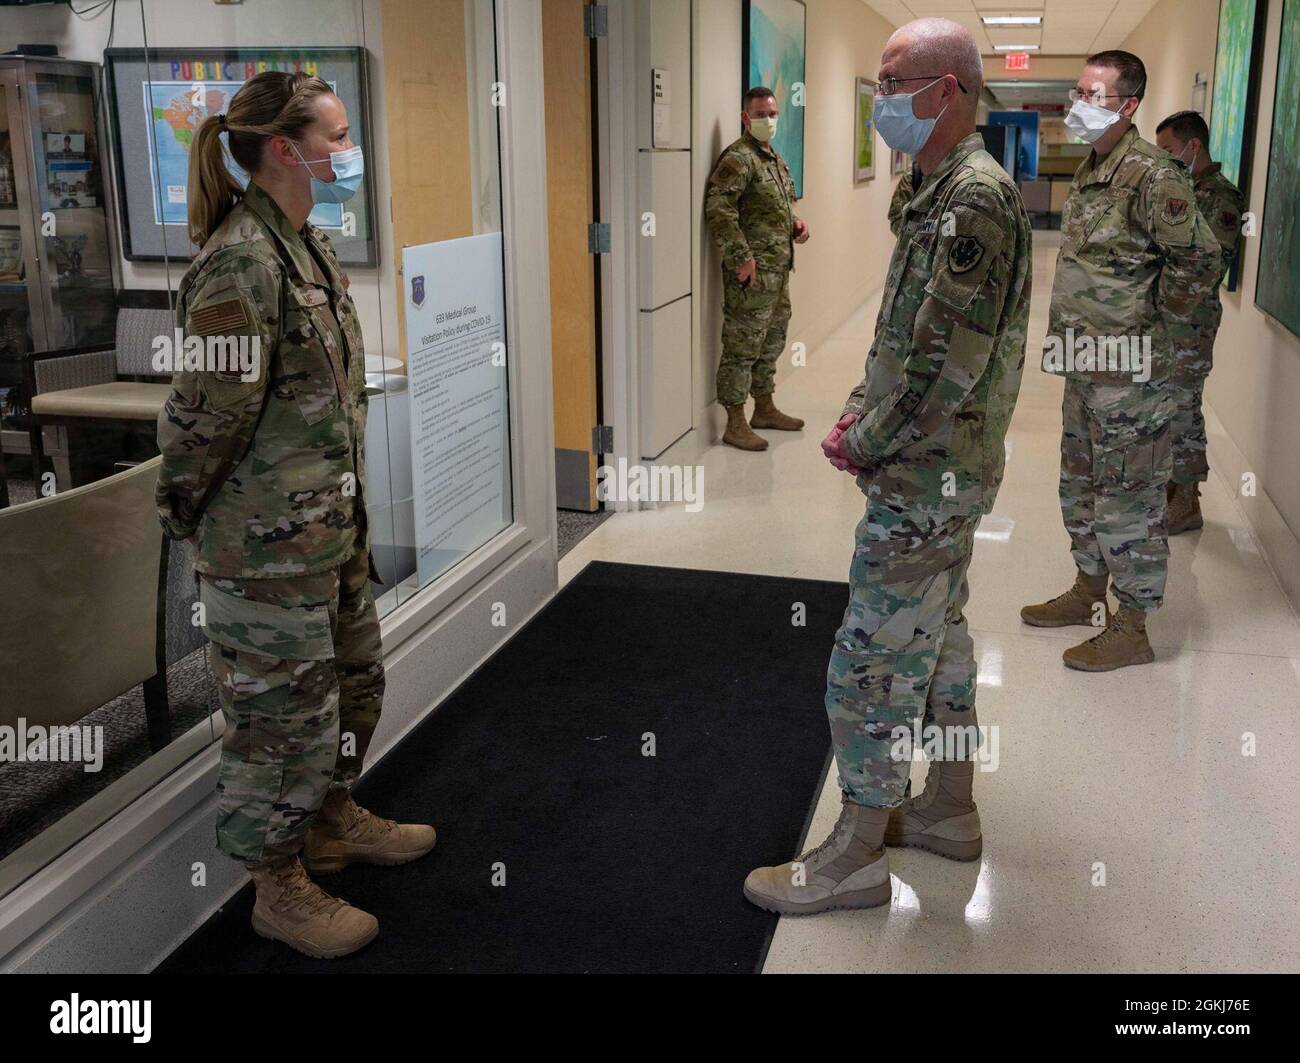 U.S. Air Force Tech. Sgt. Candace Kime, 633rd Medical Group community health section chief, briefs U.S. Army Lt. Gen. Ronald Place, Defense Health Agency director, during a visit to Joint Base Langley-Eustis, Virginia, April 29, 2020. Kime briefed on contact tracing operations during the COVID-19 pandemic. Stock Photo